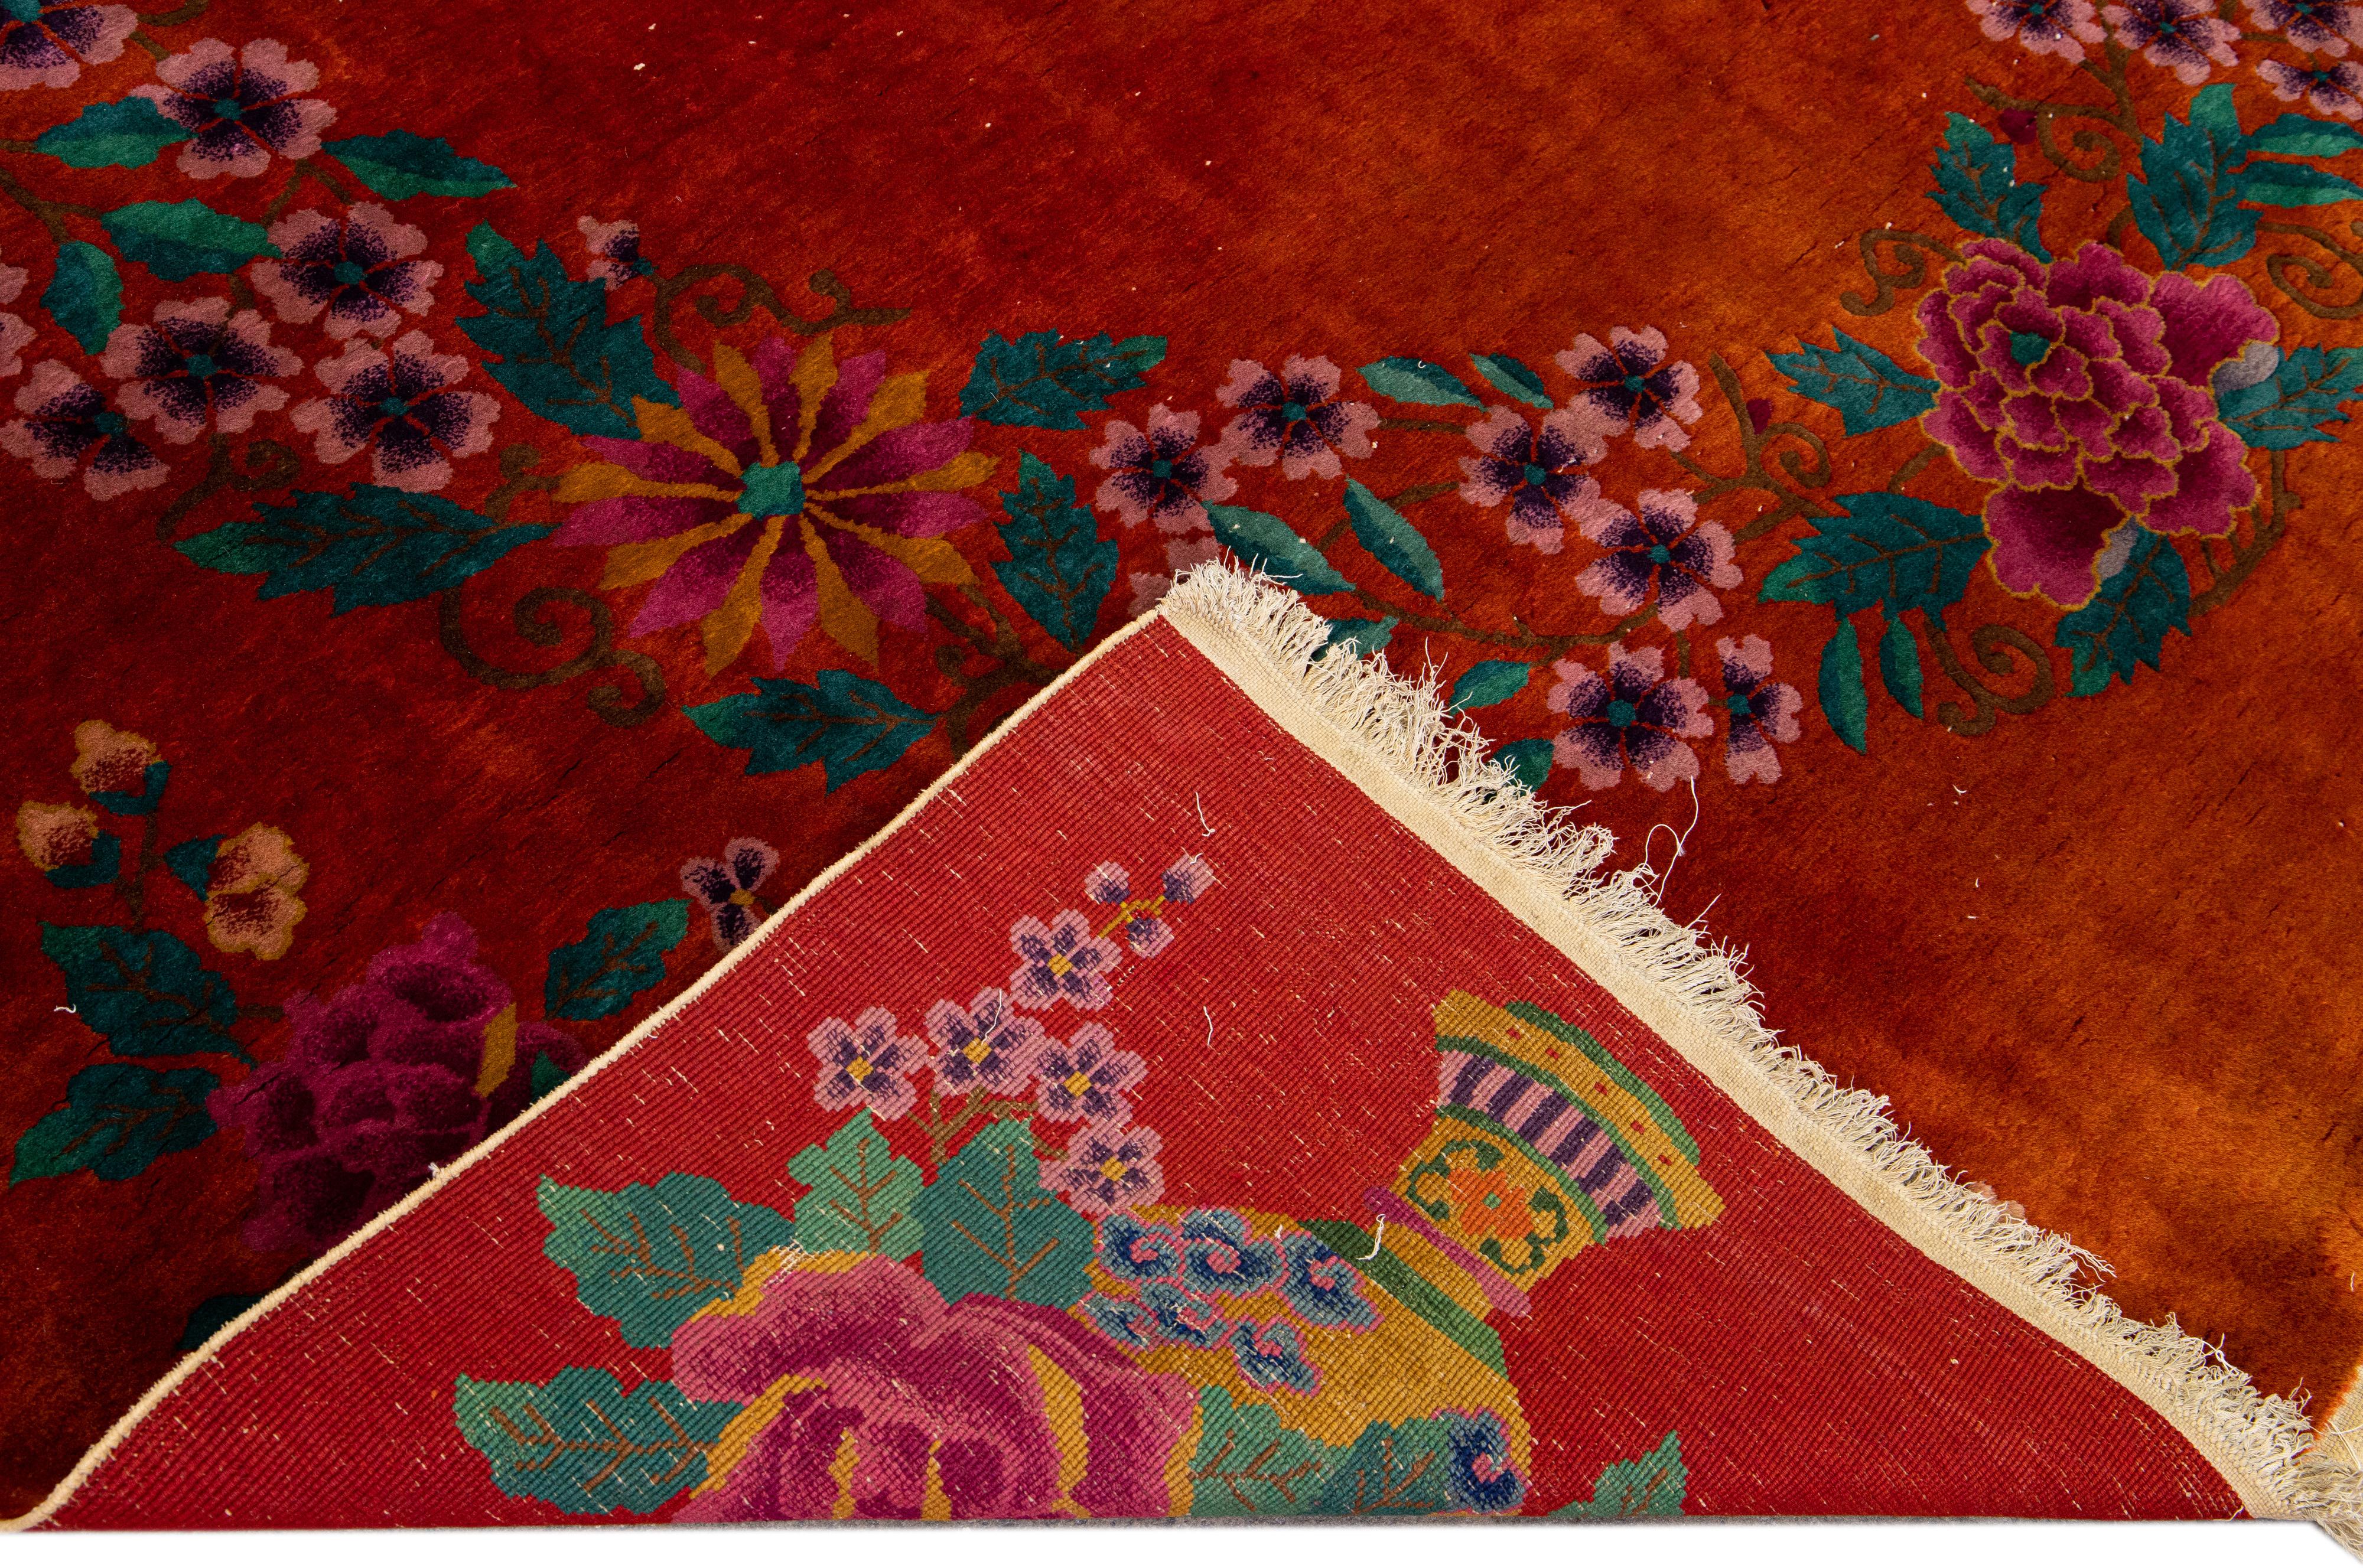 Beautiful antique Art Deco Chinese hand-knotted wool rug with a red field. This Chinese rug has green, pink, and blue accents in a gorgeous all-over traditional Chinese floral design. 

This rug measures: 8'9